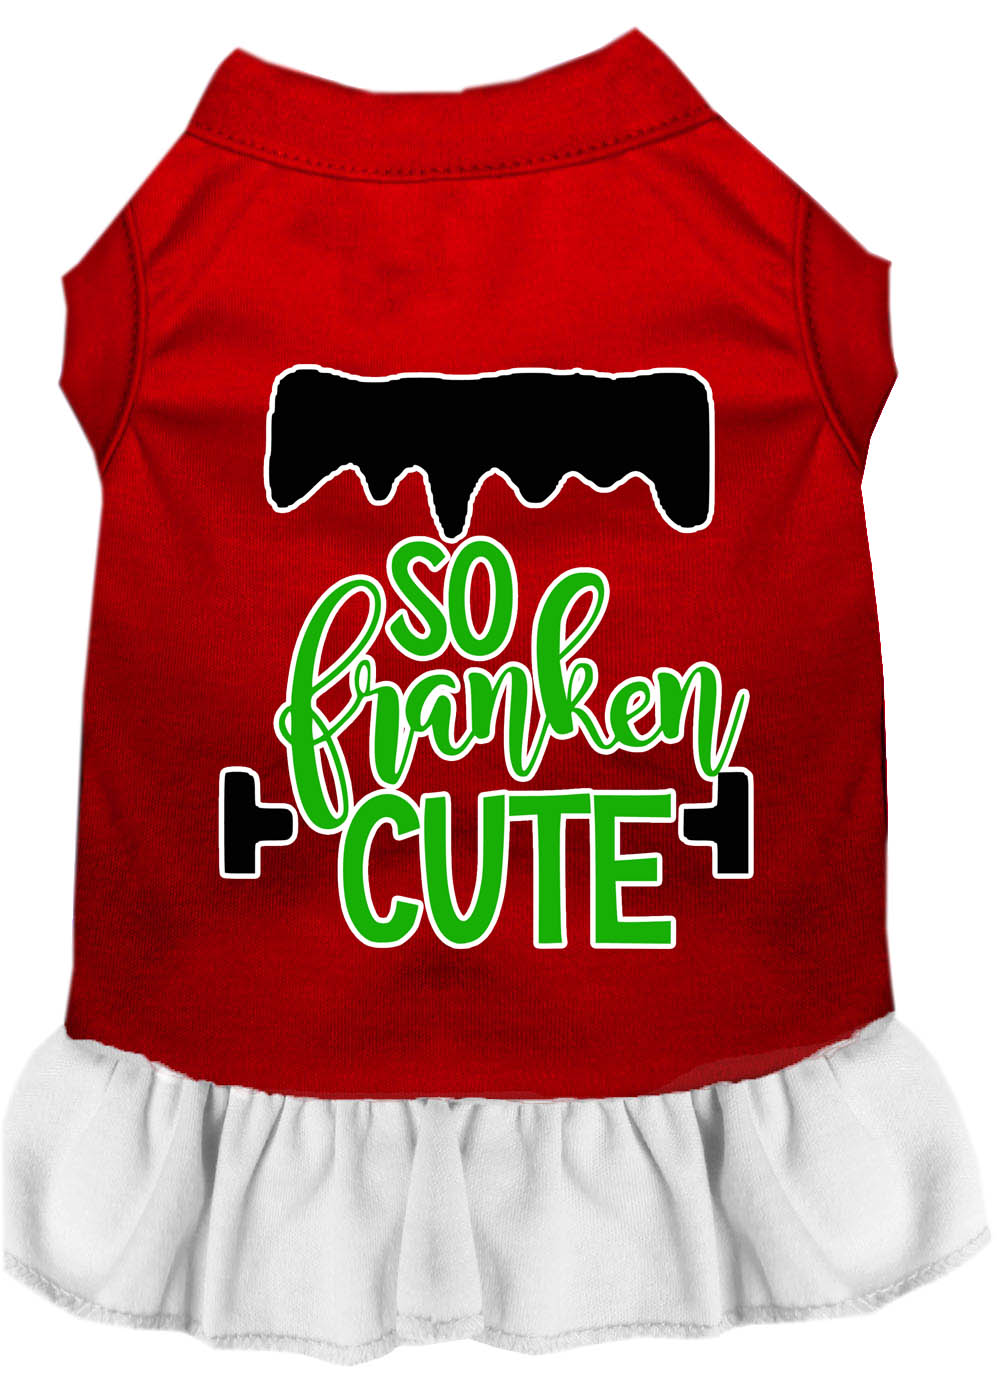 So Franken Cute Screen Print Dog Dress Red with White XS